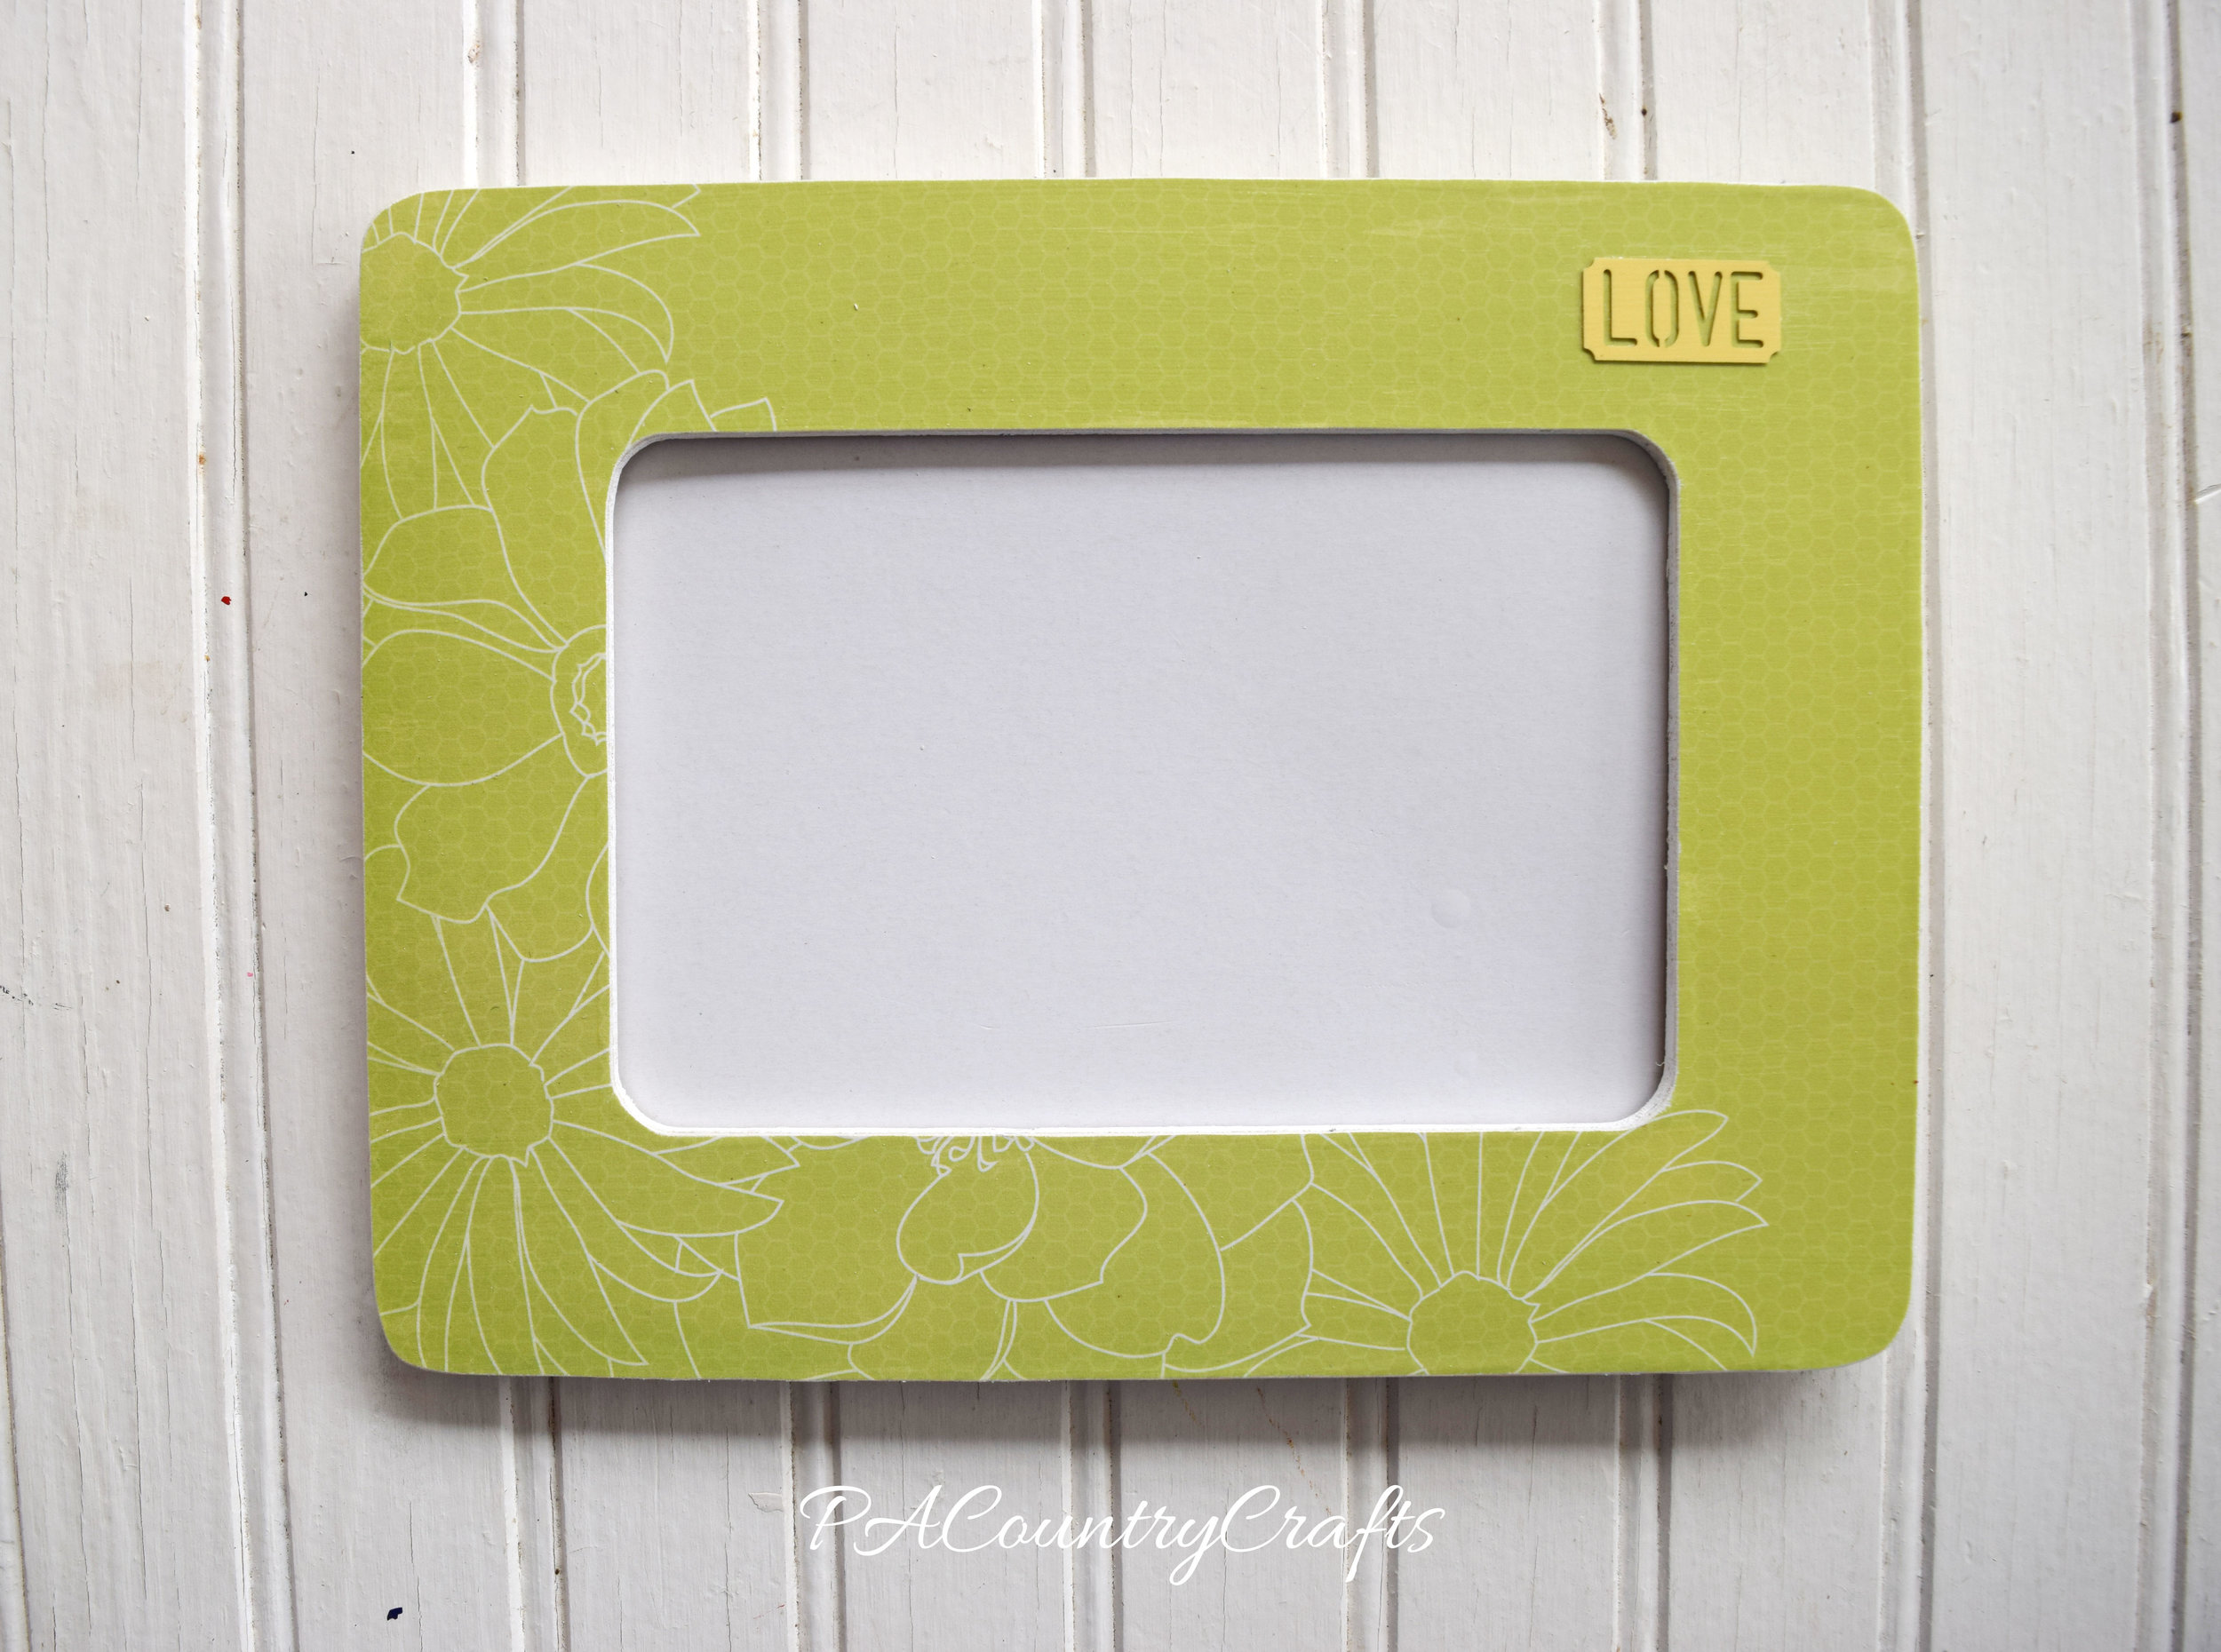 Easy picture frame craft project!